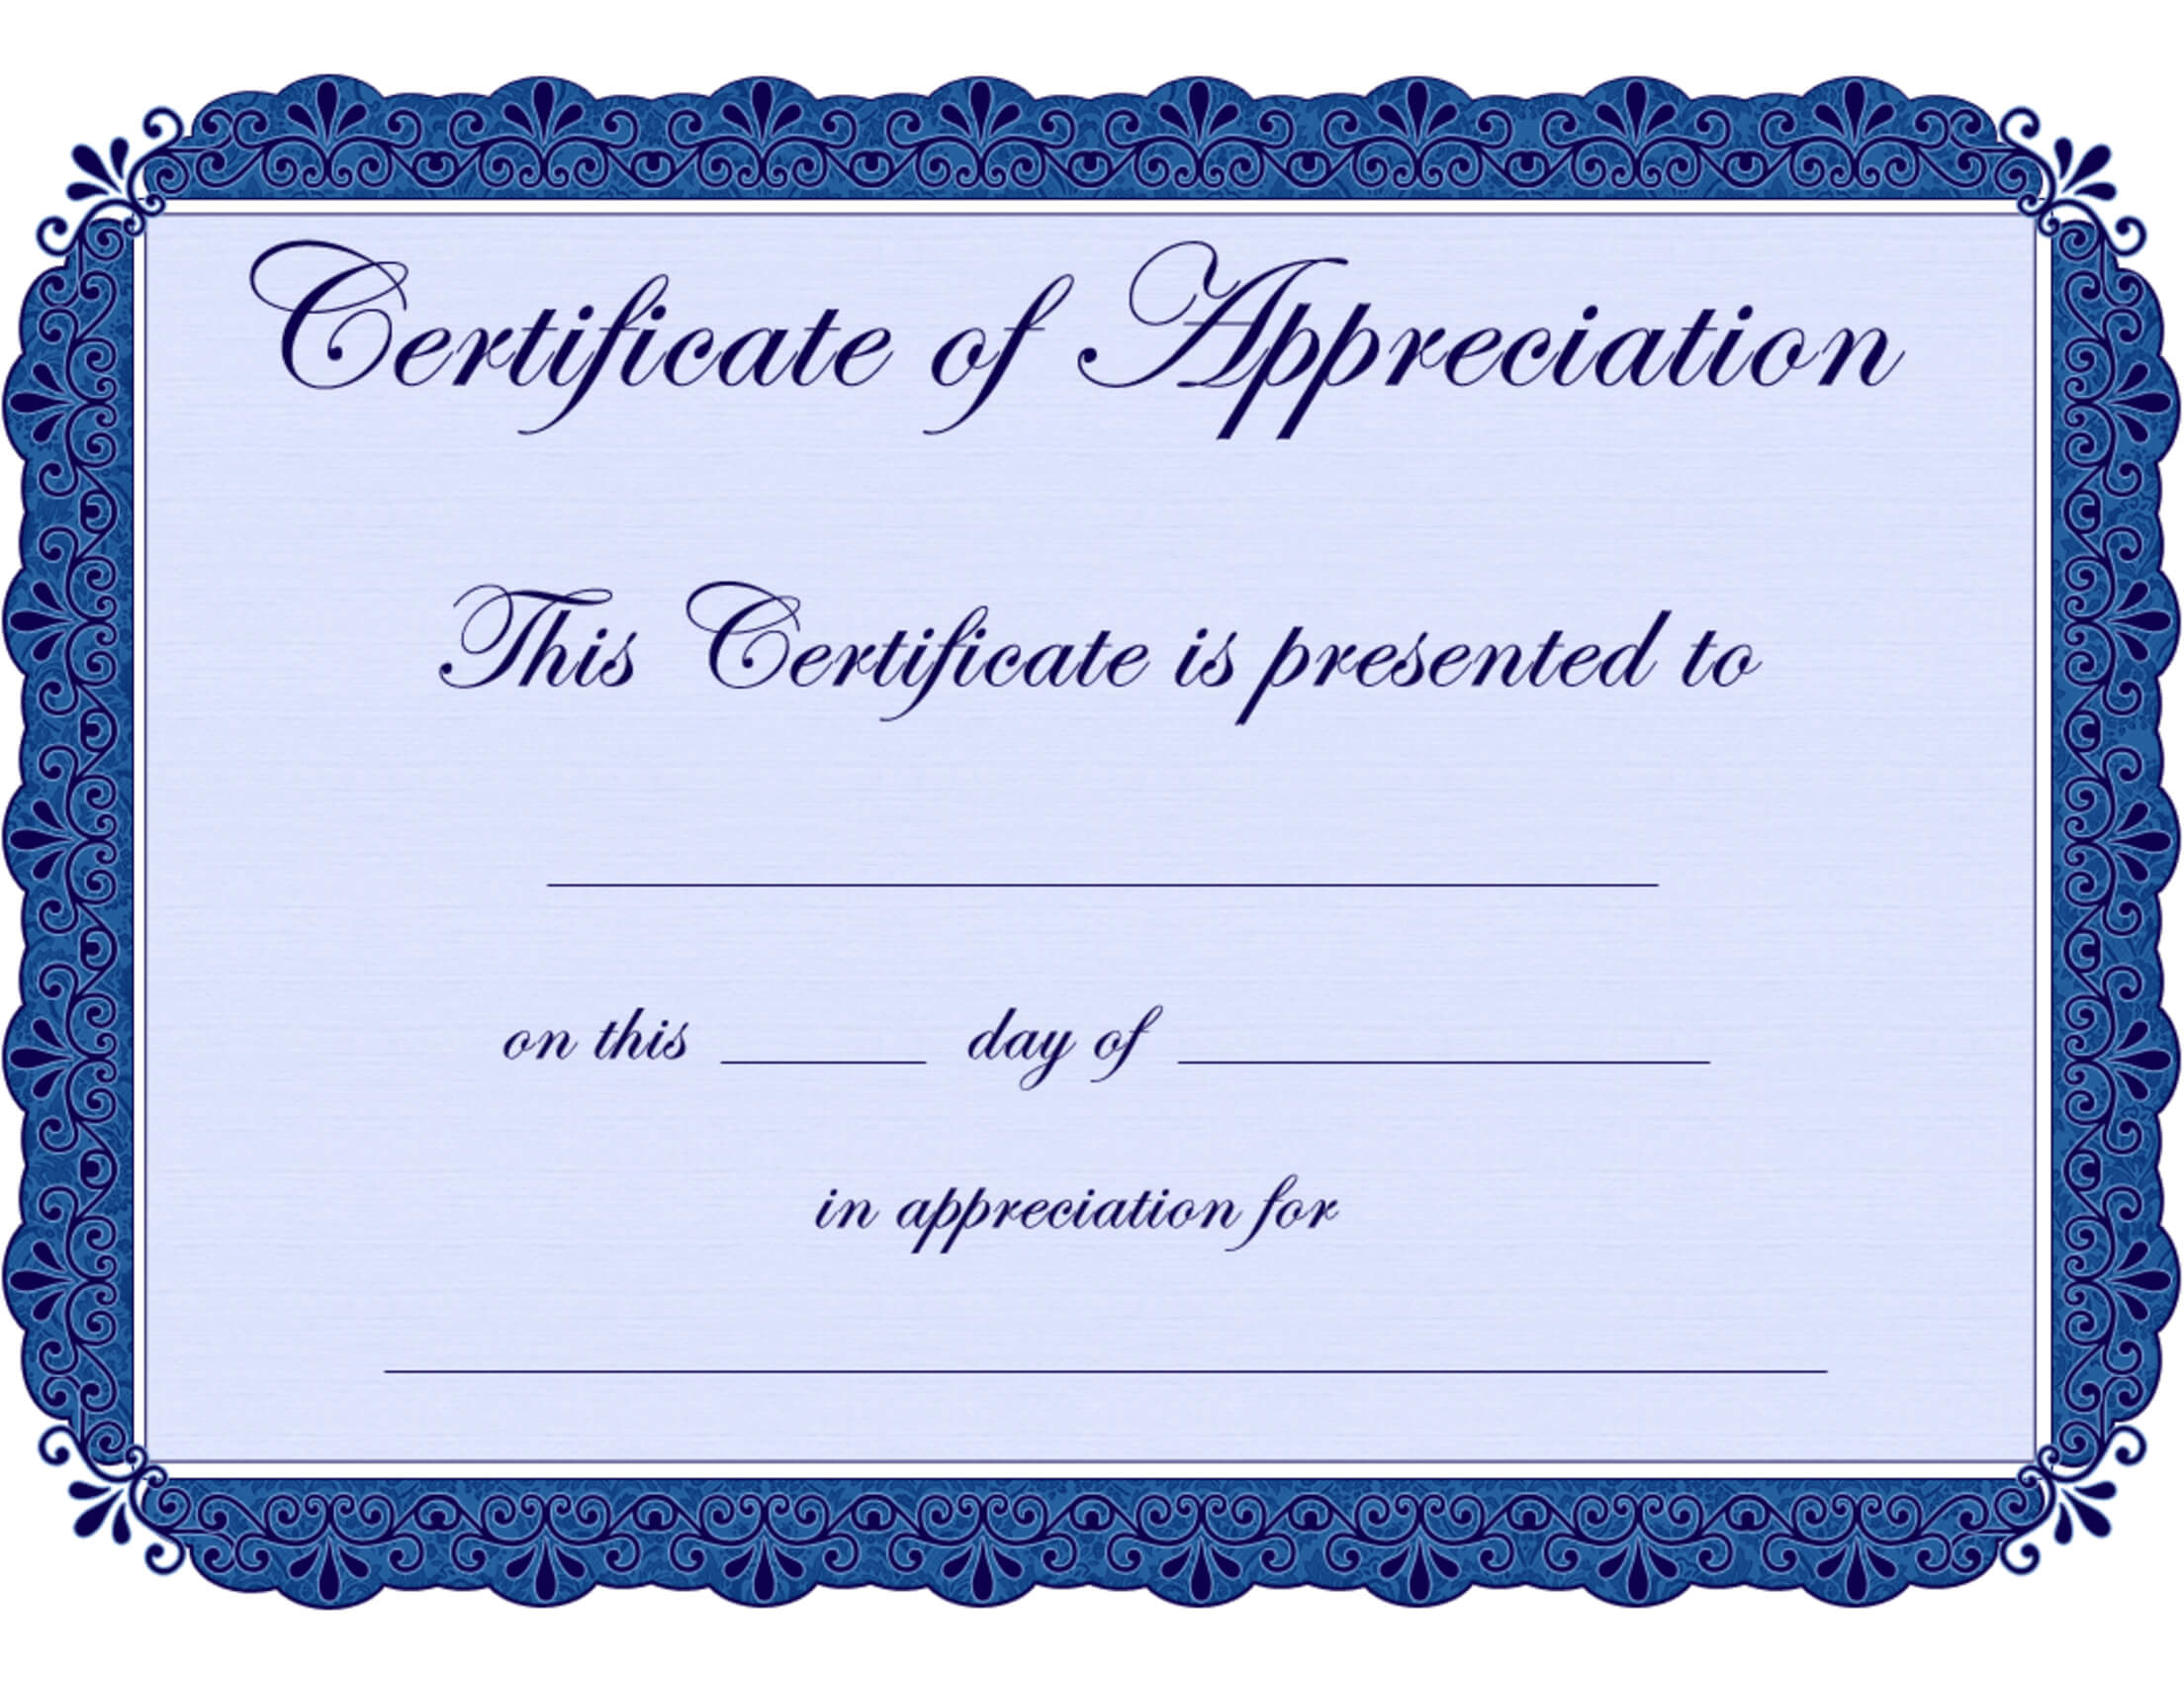 Free Printable Certificates Certificate Of Appreciation With Certificate Of Recognition Word Template